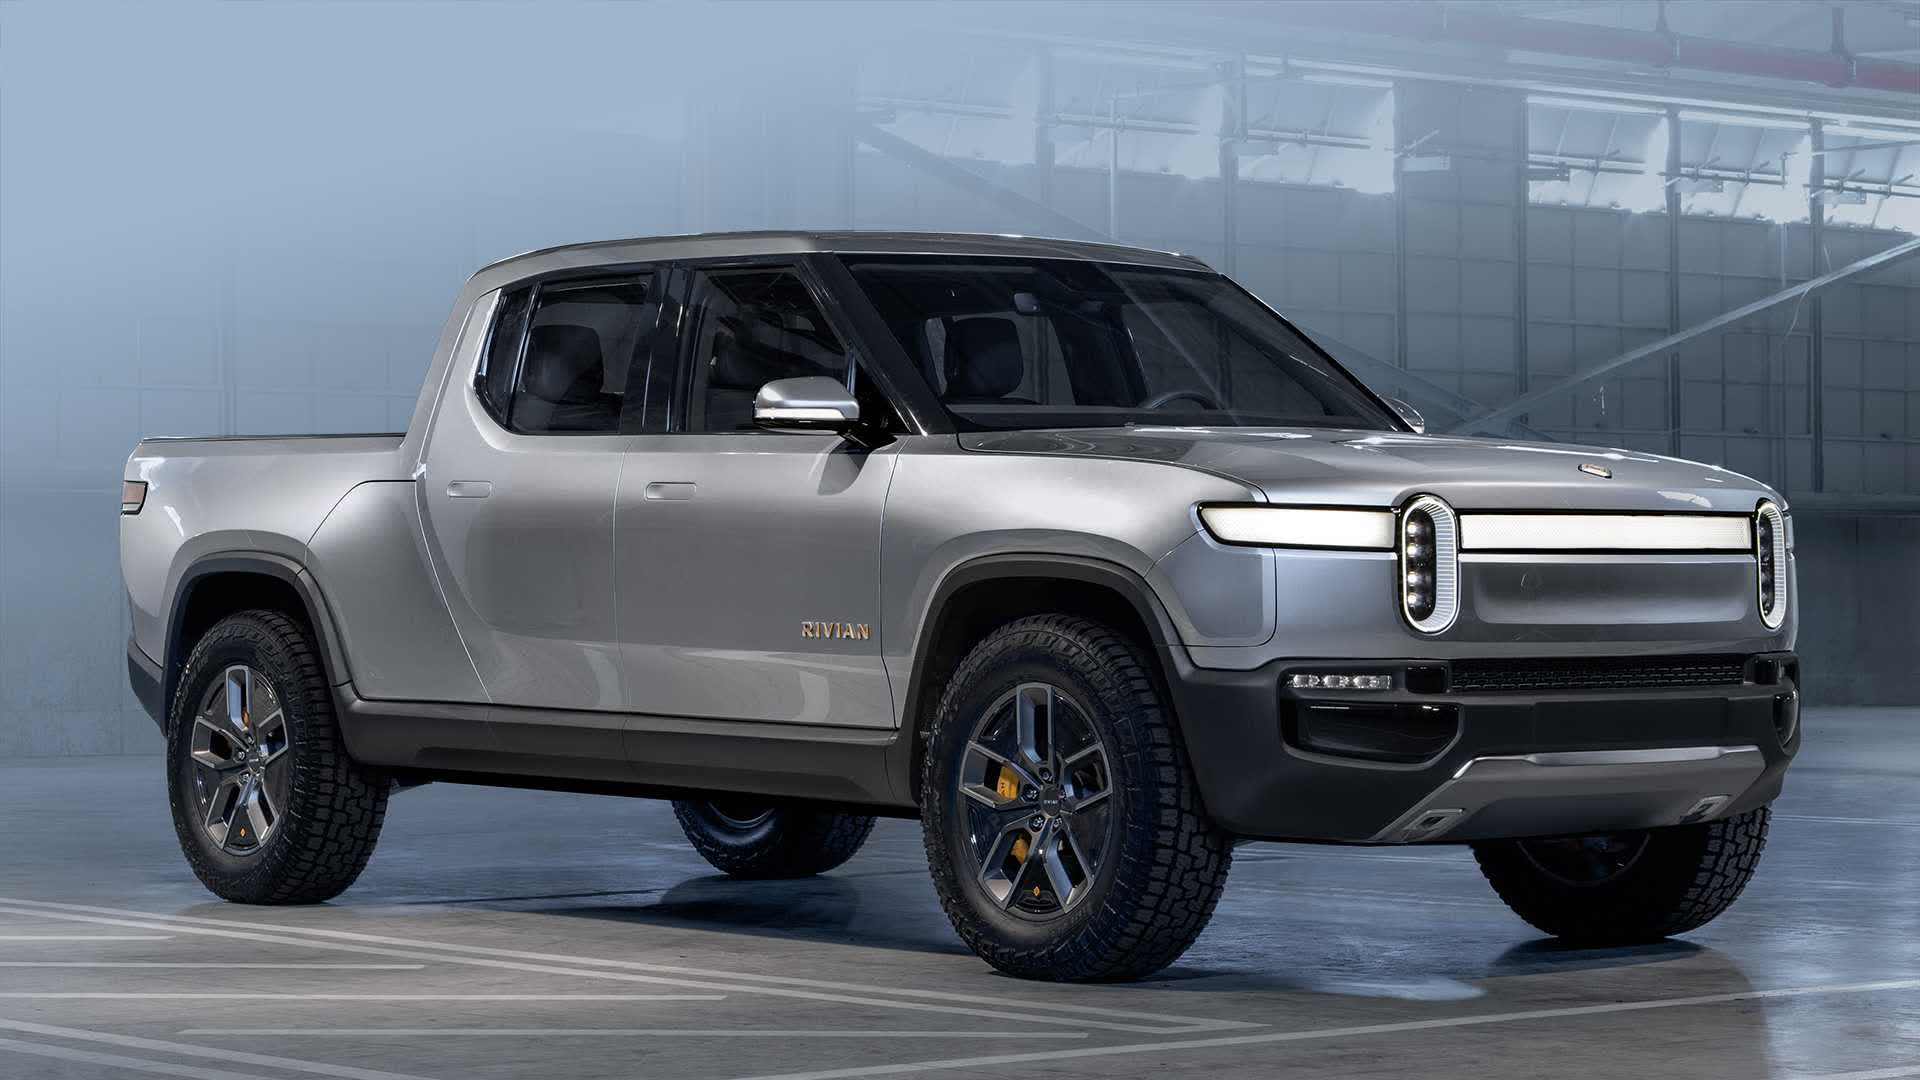 Rivian delays the launch of its R1T pickup truck, now ships in September